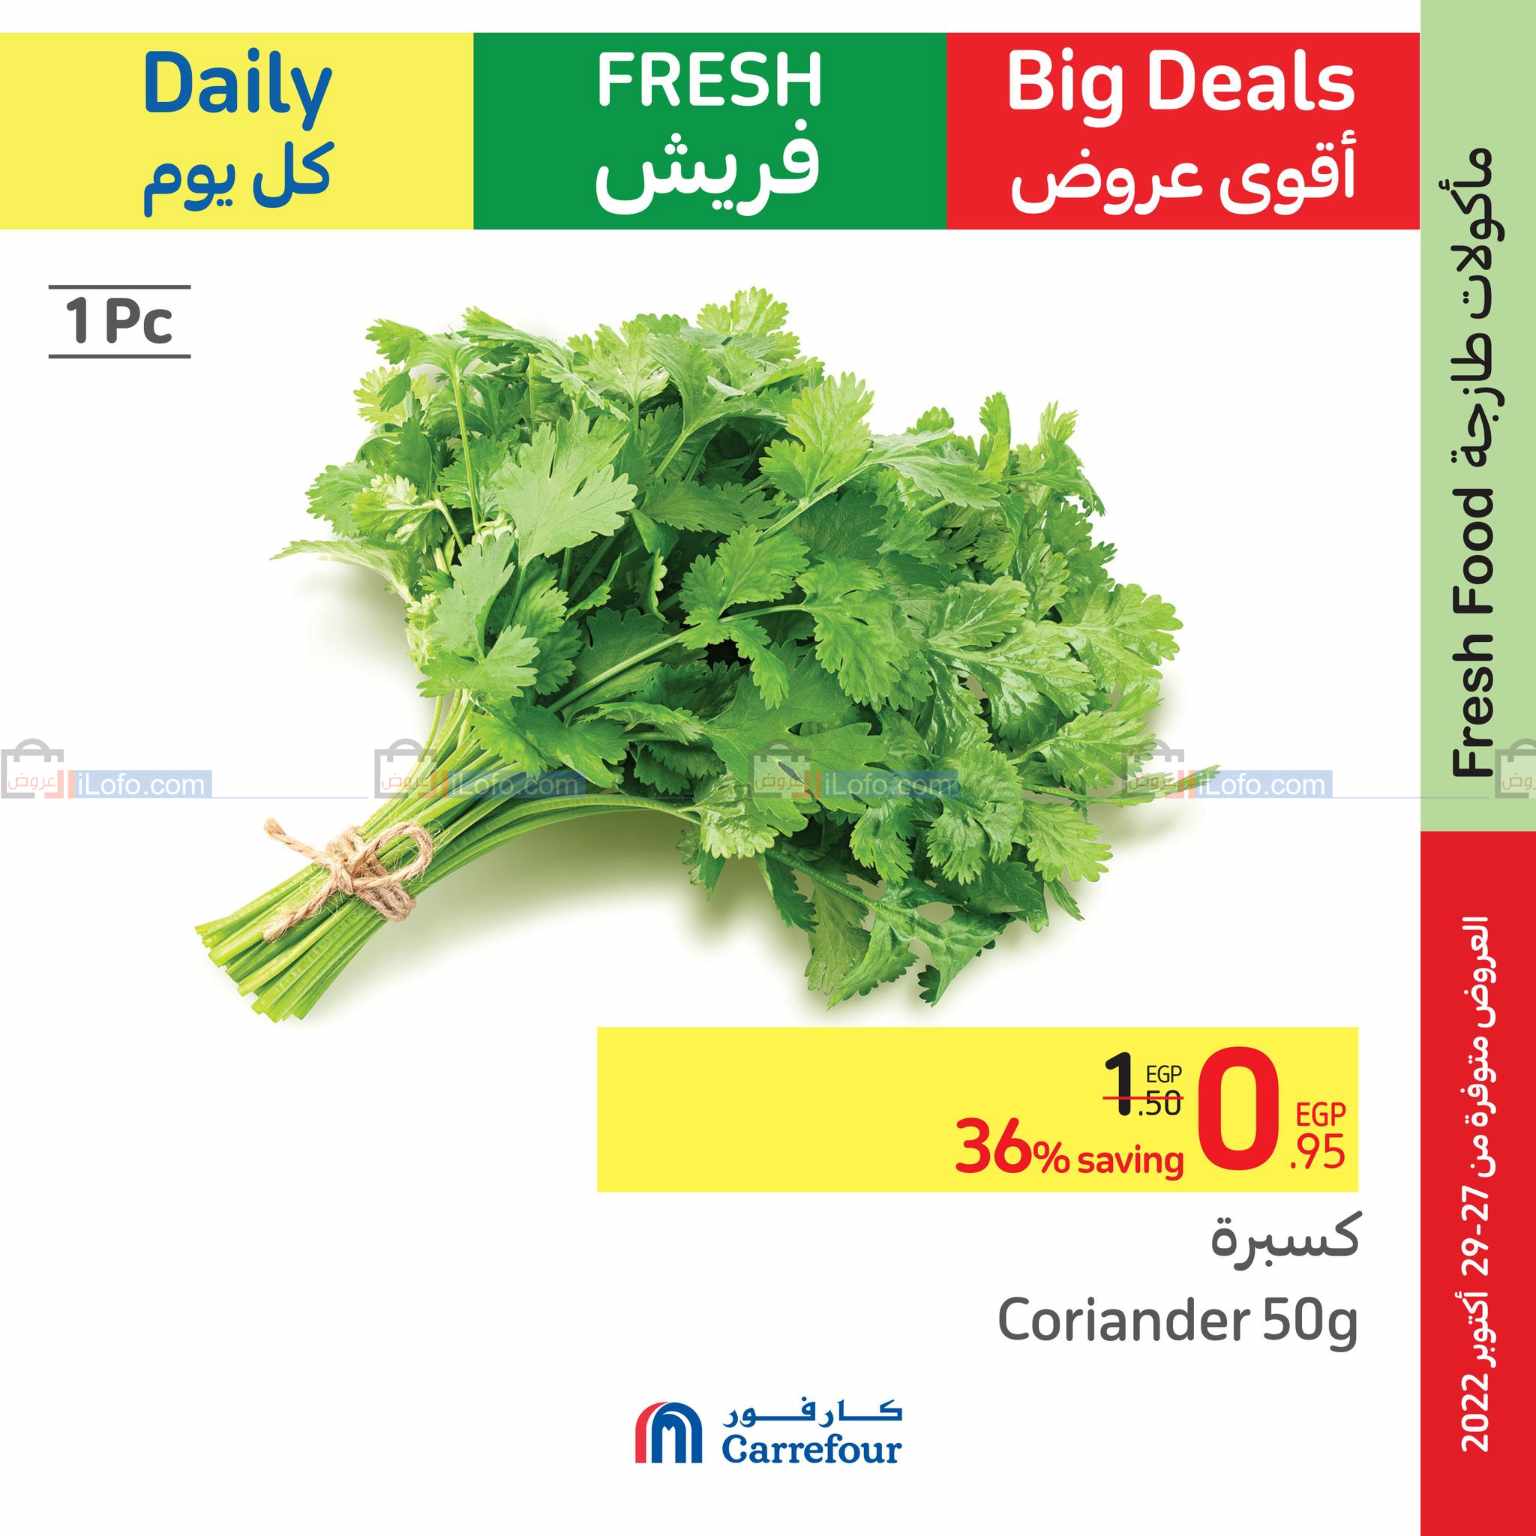 Page 9 at Fresh Deals at Carrefour Egypt 